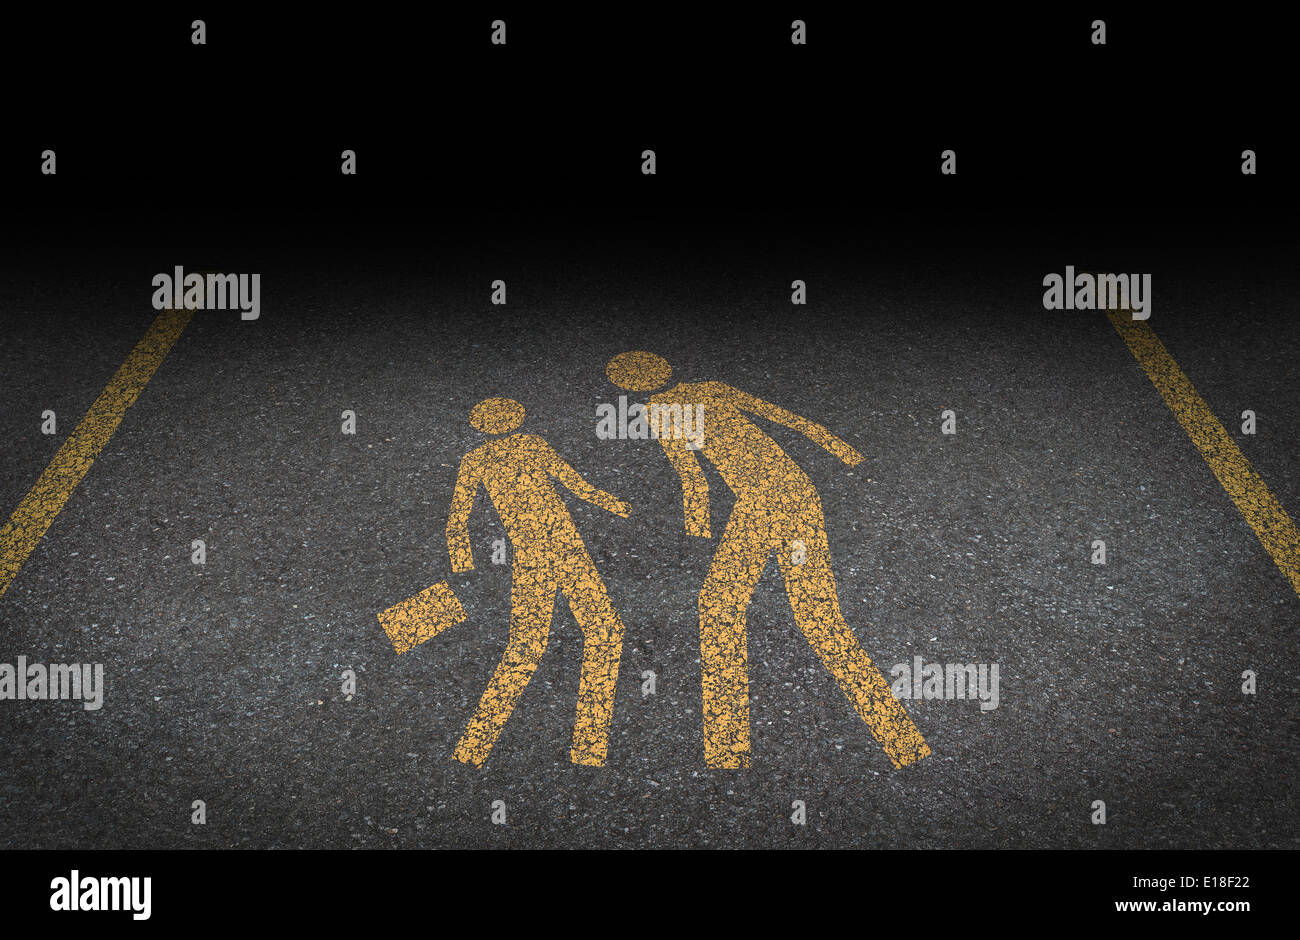 Big bully and bullying concept as yellow painted road sign on asphalt with an abusive bully attacking a another person as a symbol of the anxiety of being bullied and the social issues of human psychological abuse and fear. Stock Photo